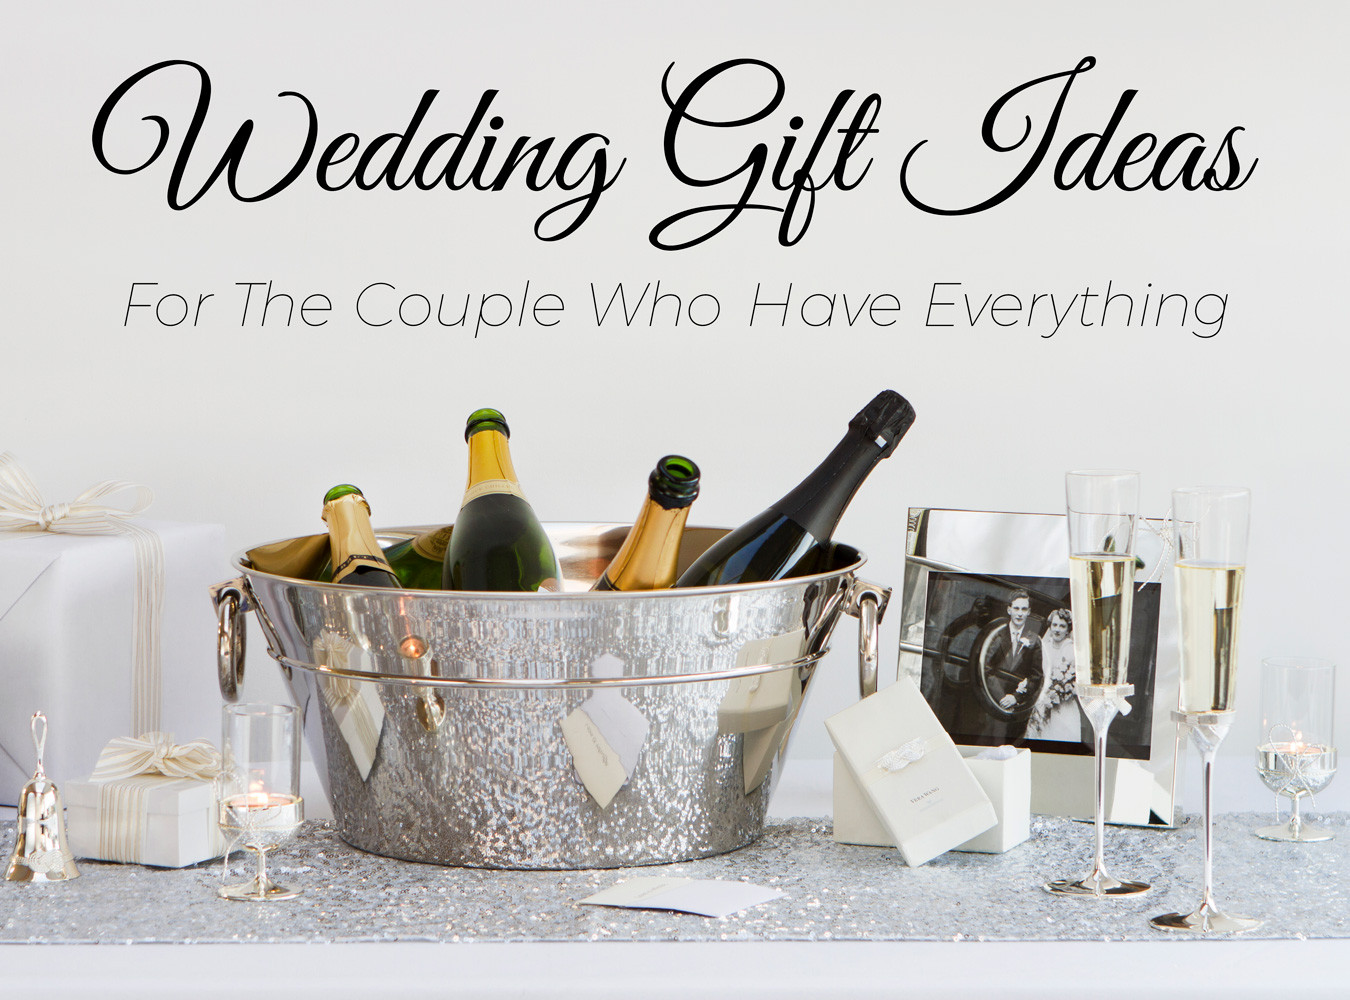 Gift Ideas For Married Couples
 5 Wedding Gift Ideas for the Couple Who Have Everything